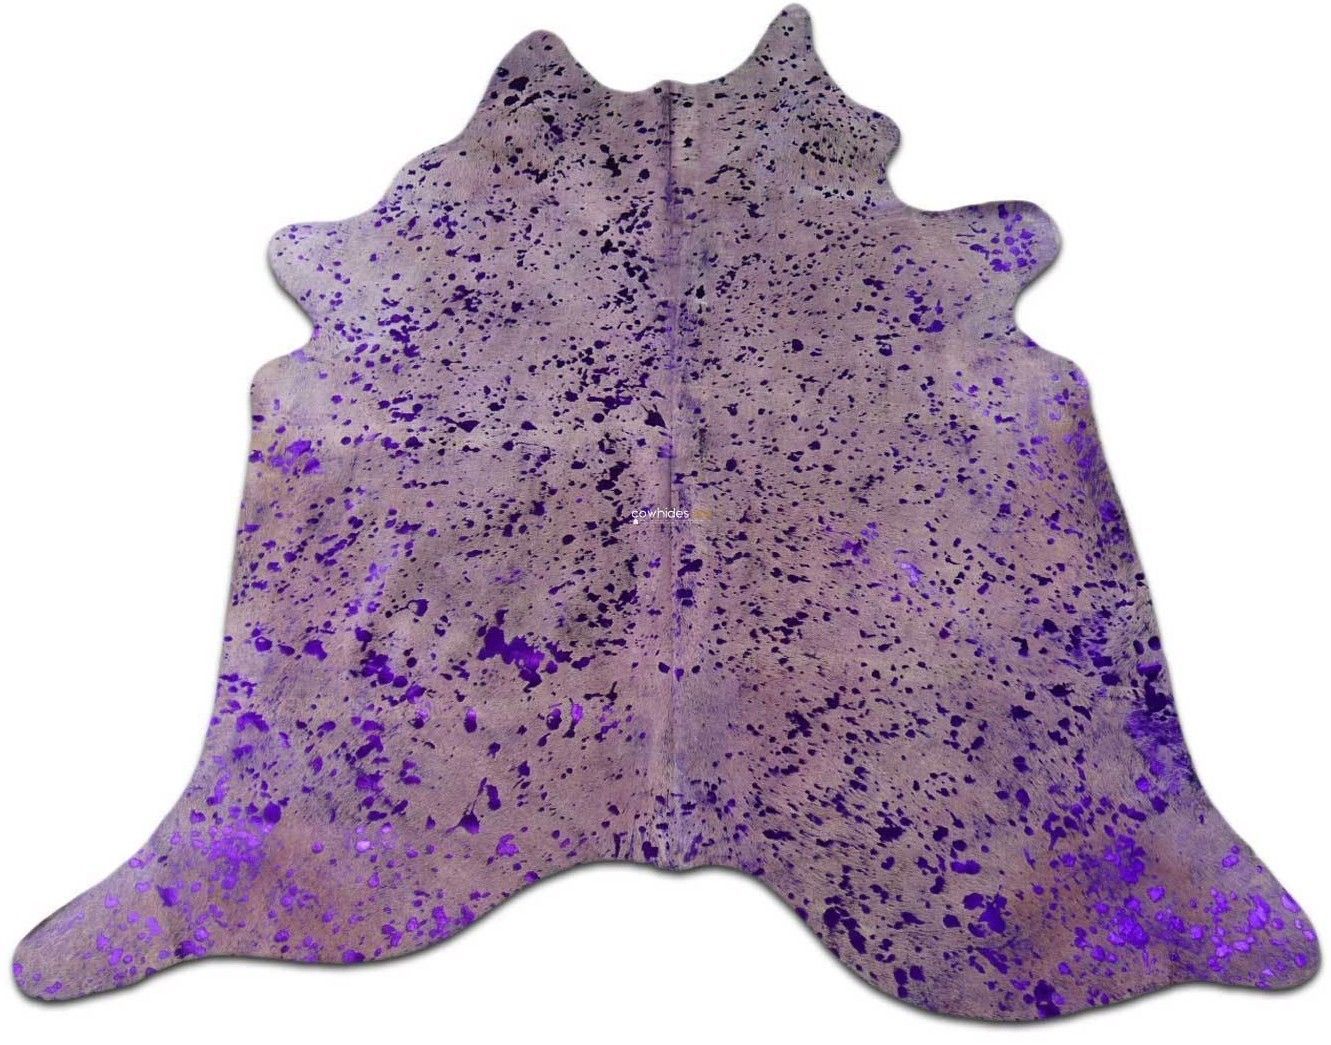 Primary image for Purple Metallic Cowhide Size: 7' X 6.5' Purple Metallic Cowhide Rug M-370